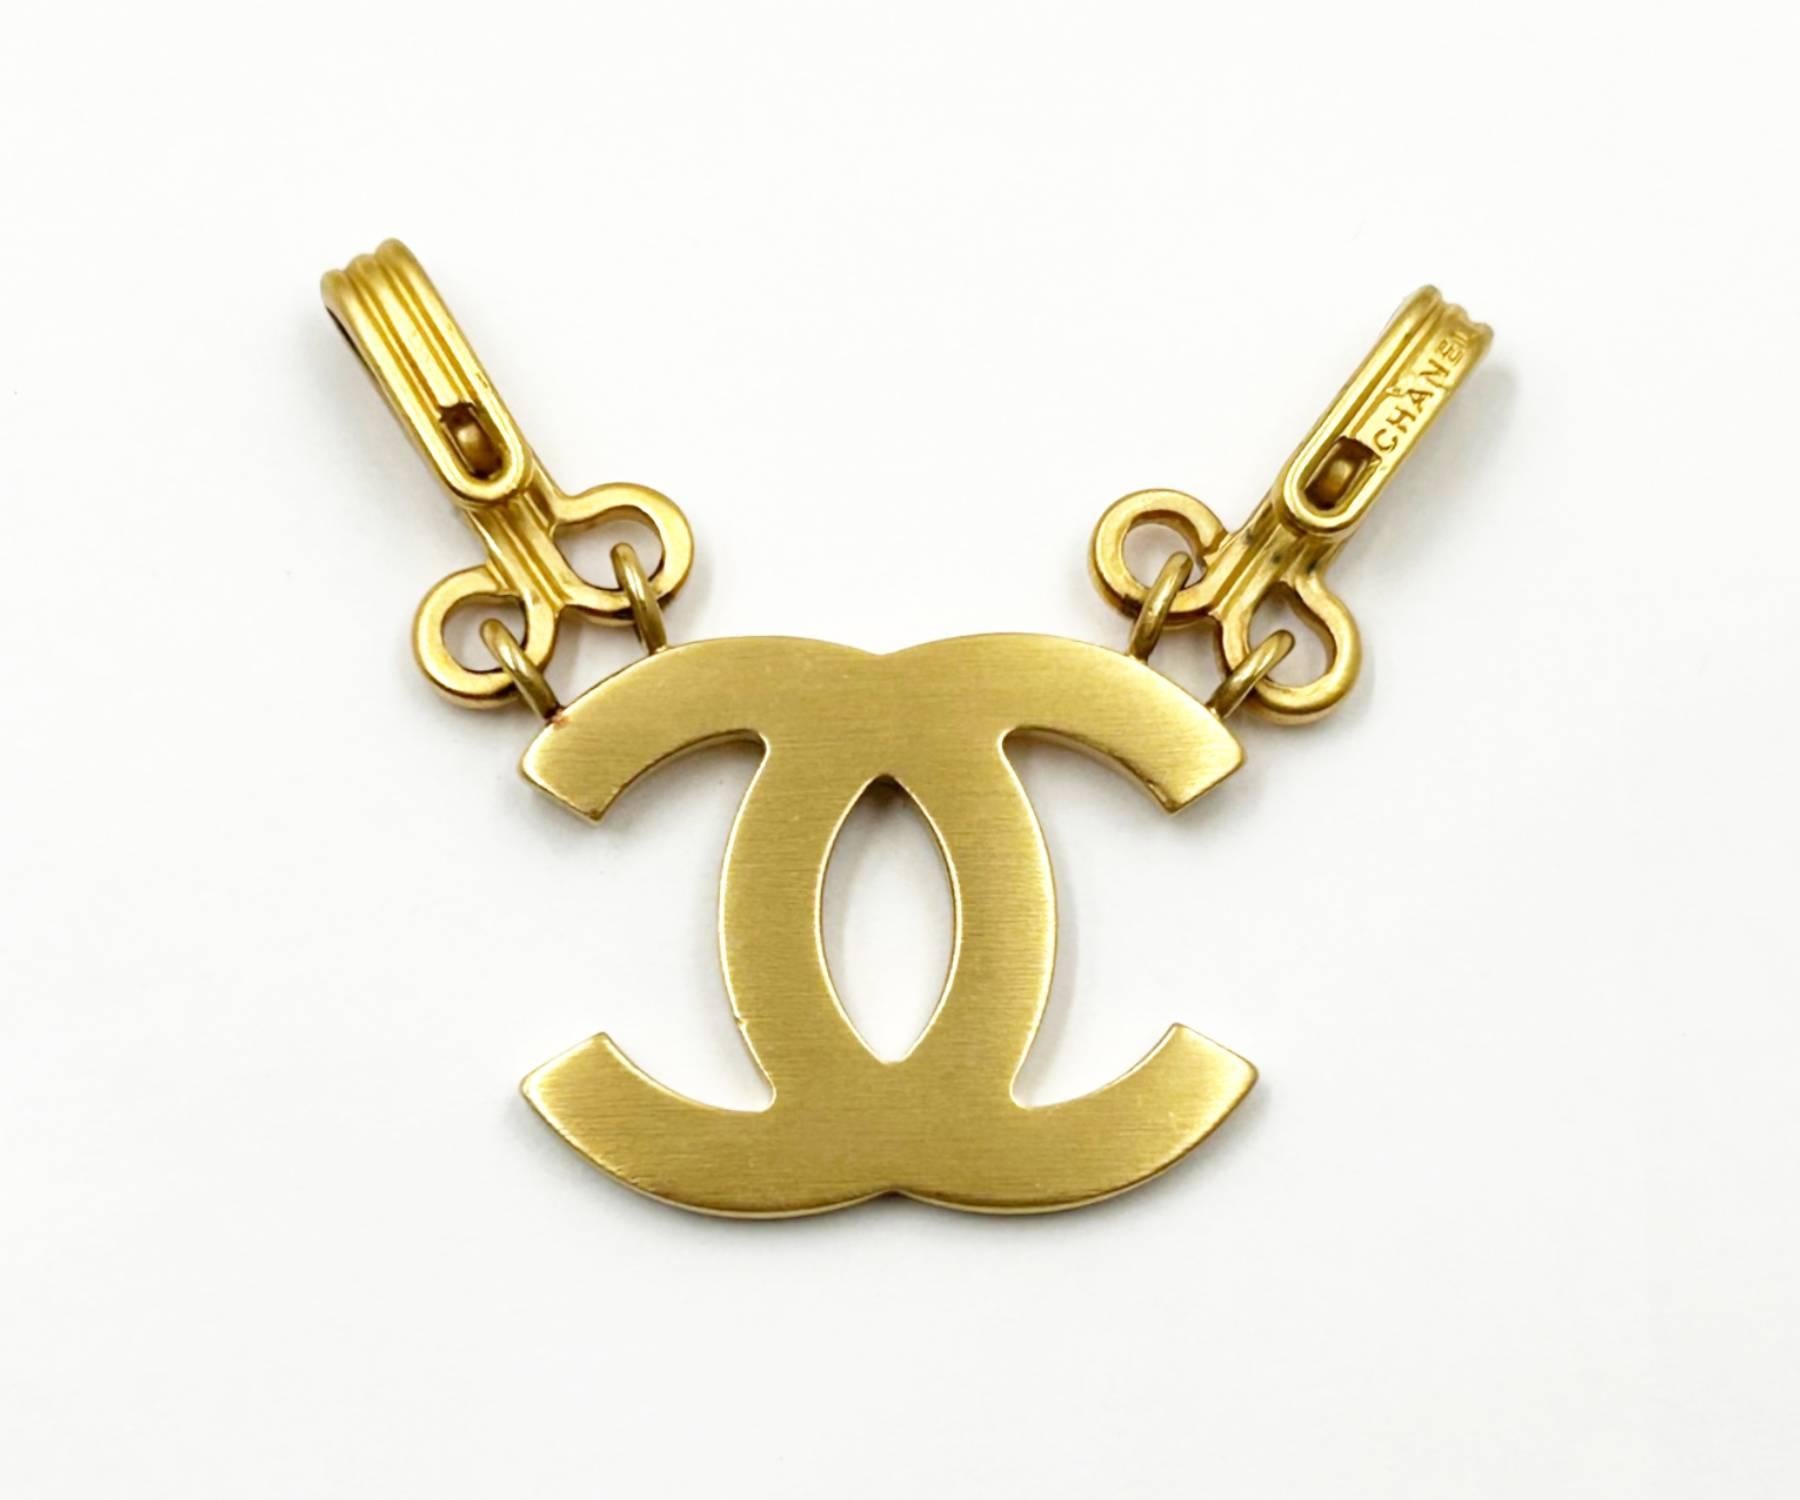 Chanel Vintage Gold CC Hook and Eye Large Pendant

*Marked 03
*Made in Italy

-It is approximately 2.25